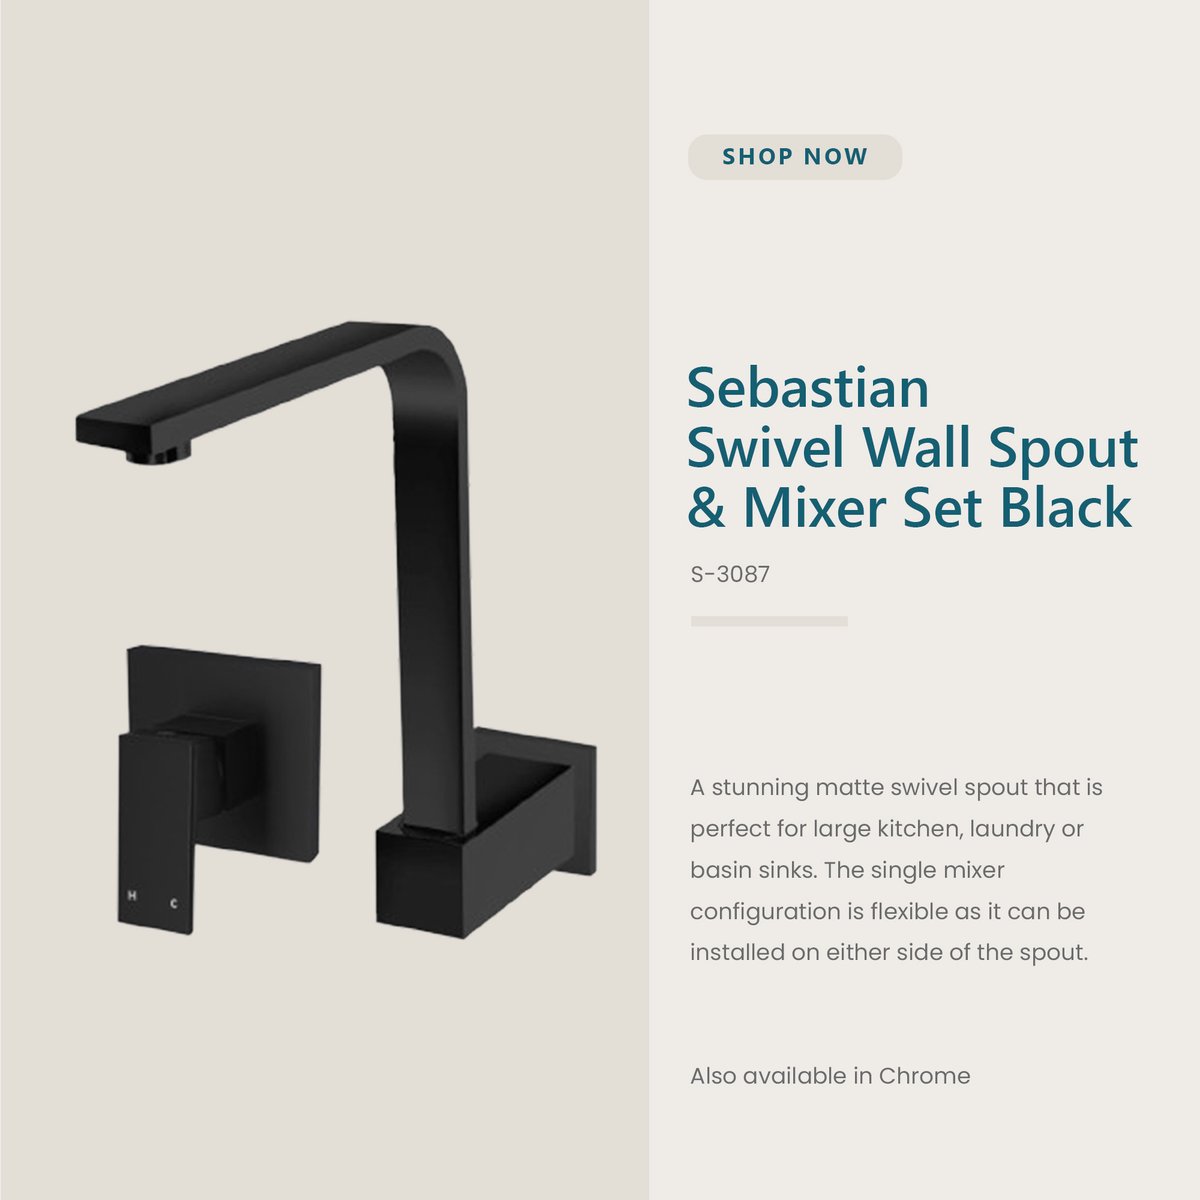 Upgrade your kitchen, laundry or bathroom sink with our matte black square swivel wall spout & mixer set.

#tapware #taps #kitchentaps #kitchen #bathroom #bathroomtaps #basintaps #squaretap #moderntaps #mixer #matte #matteblack #matt #mattblack #swivelspout